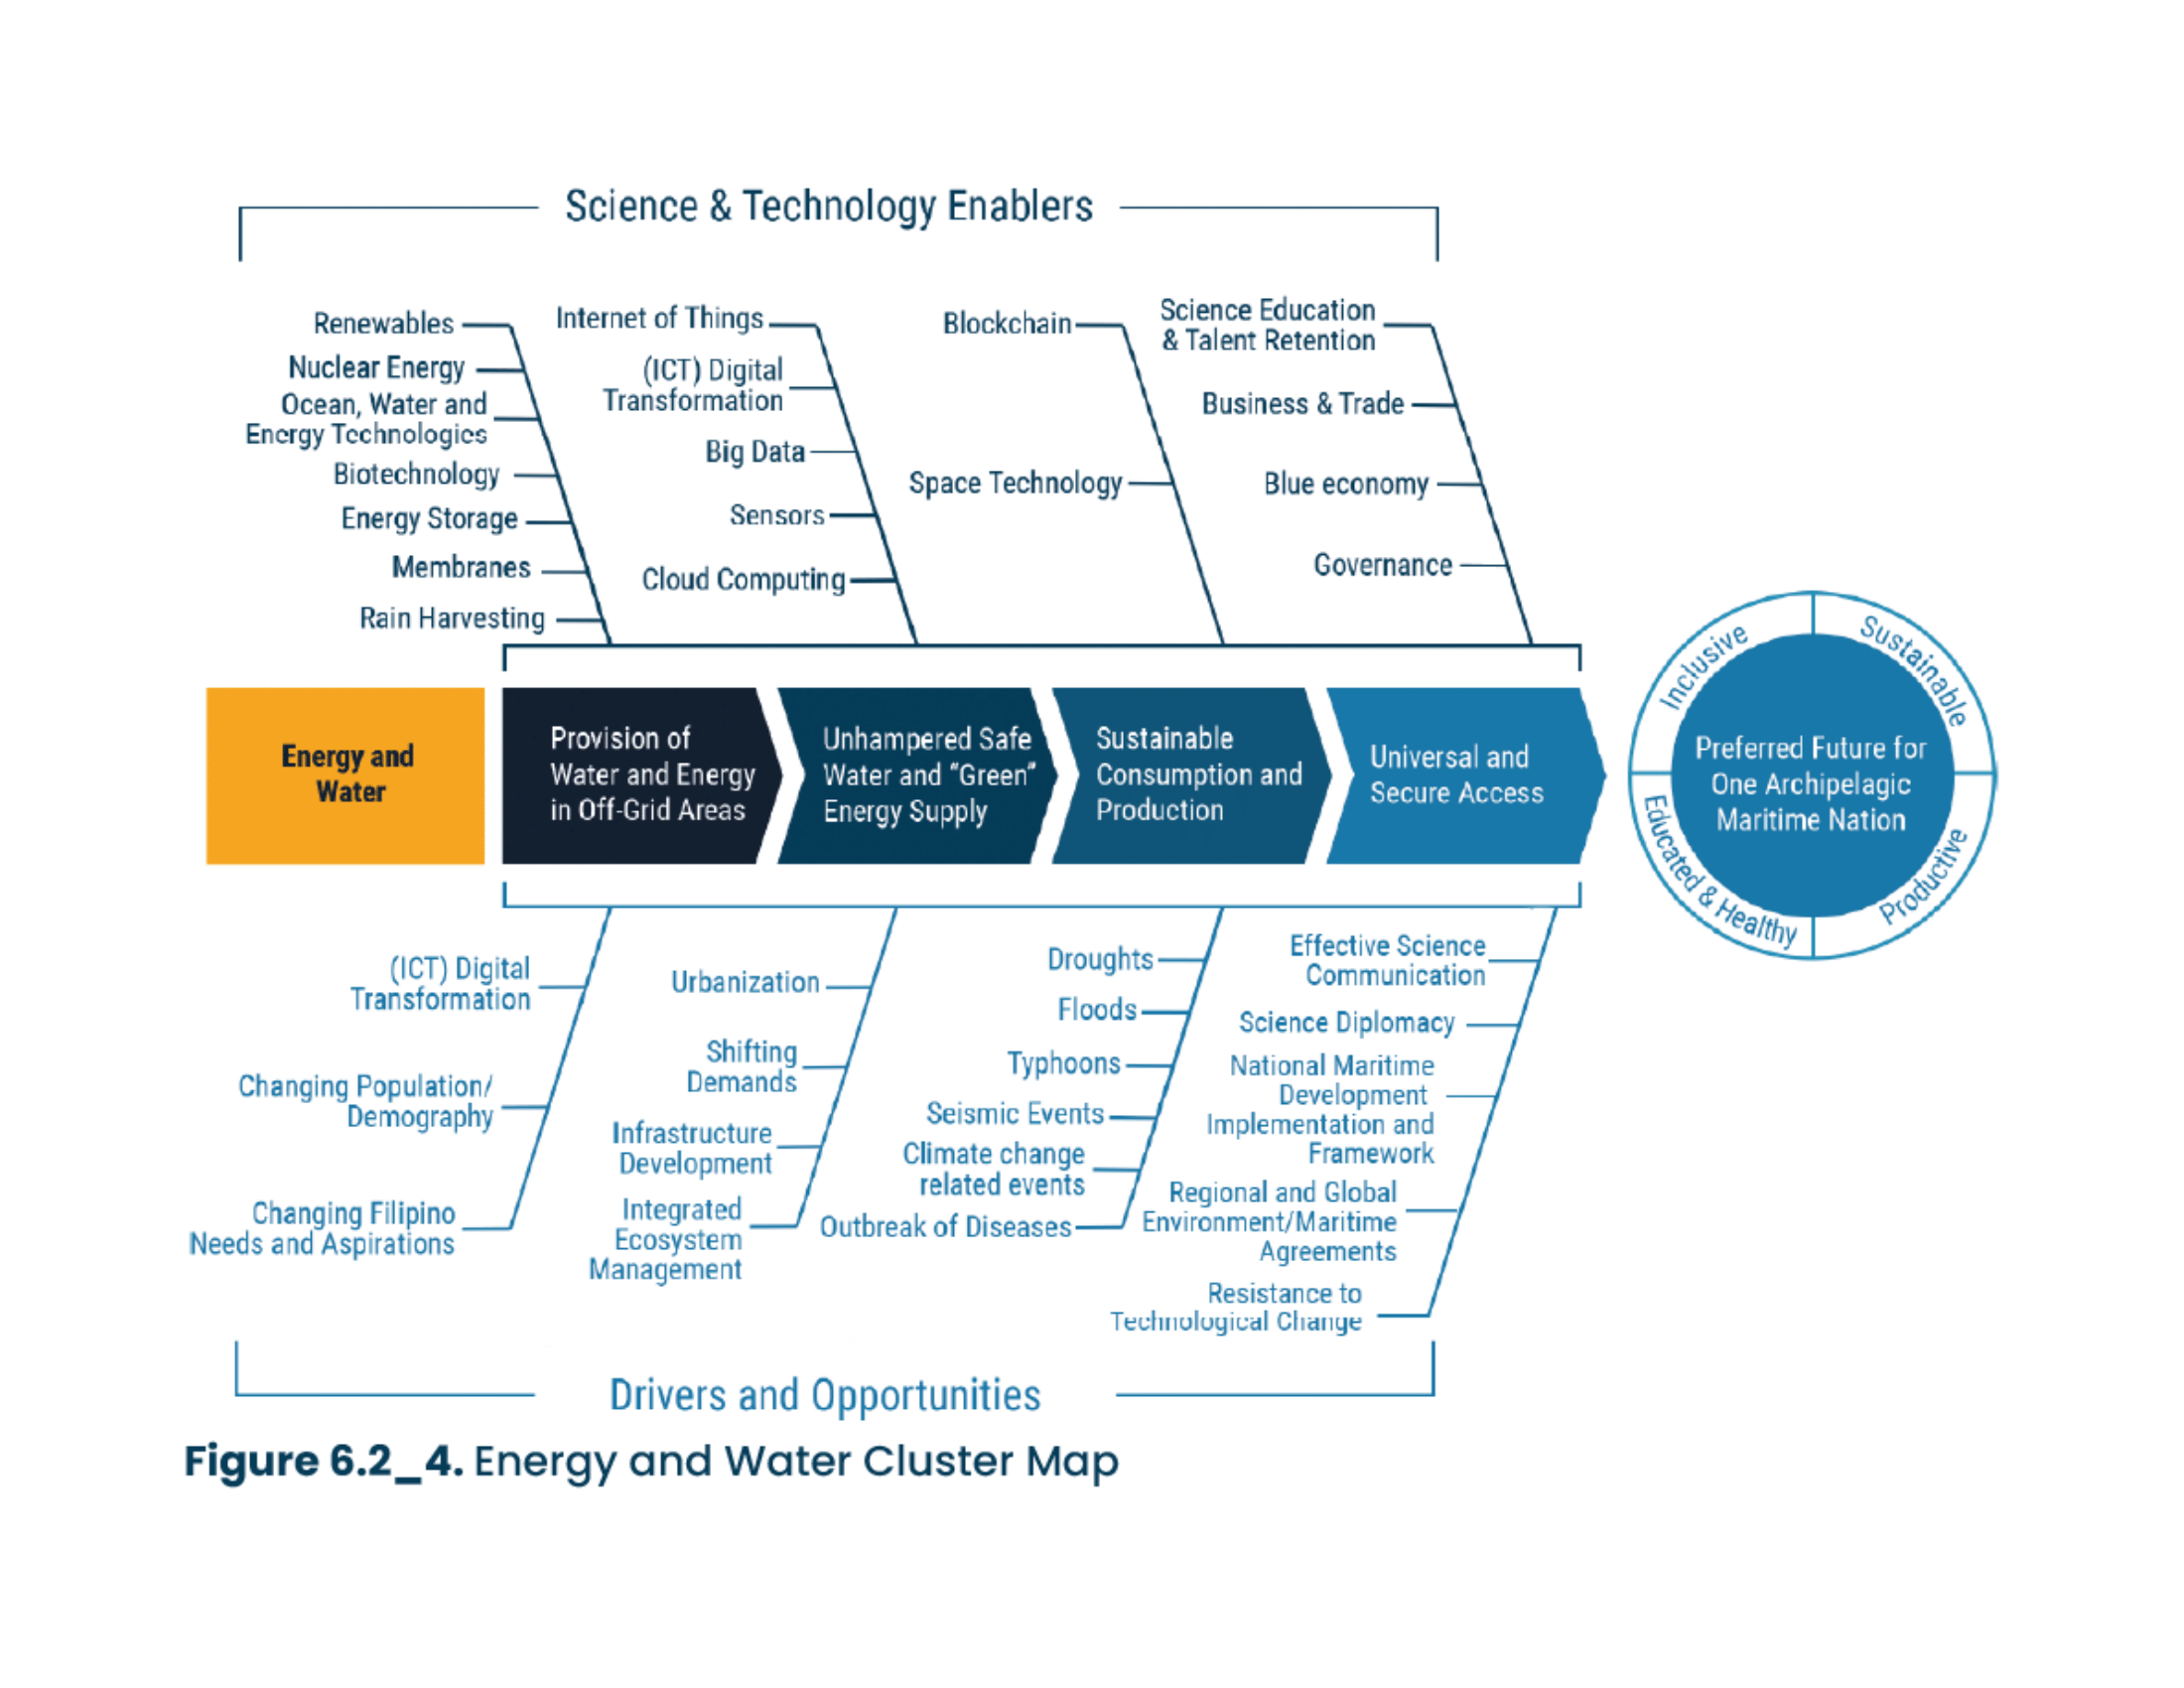 Figure 6.2 4.Energy and Water Cluster Road Map